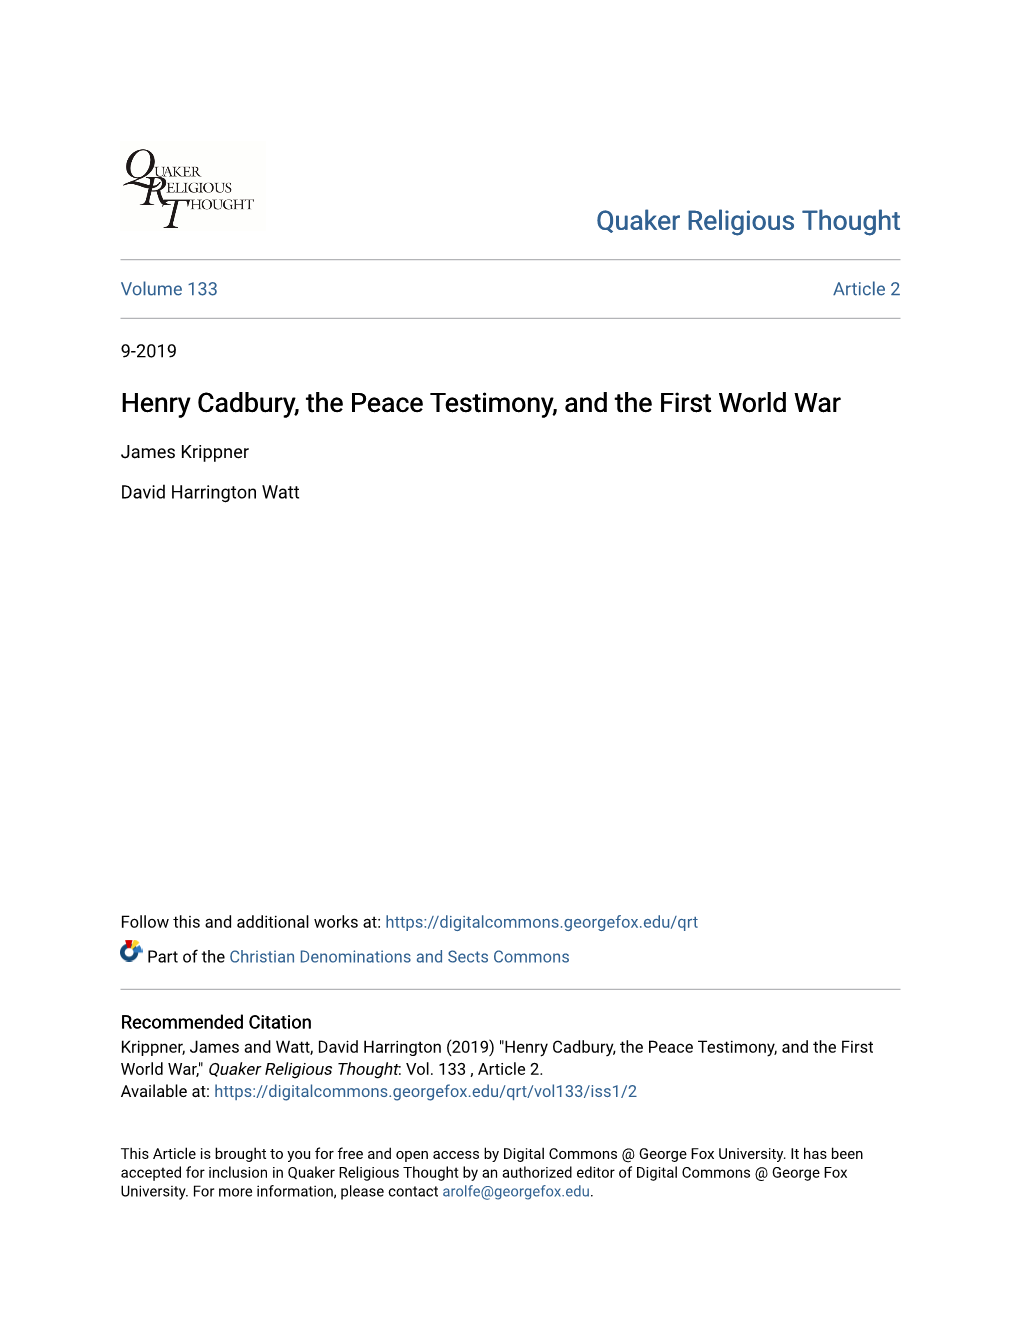 Henry Cadbury, the Peace Testimony, and the First World War